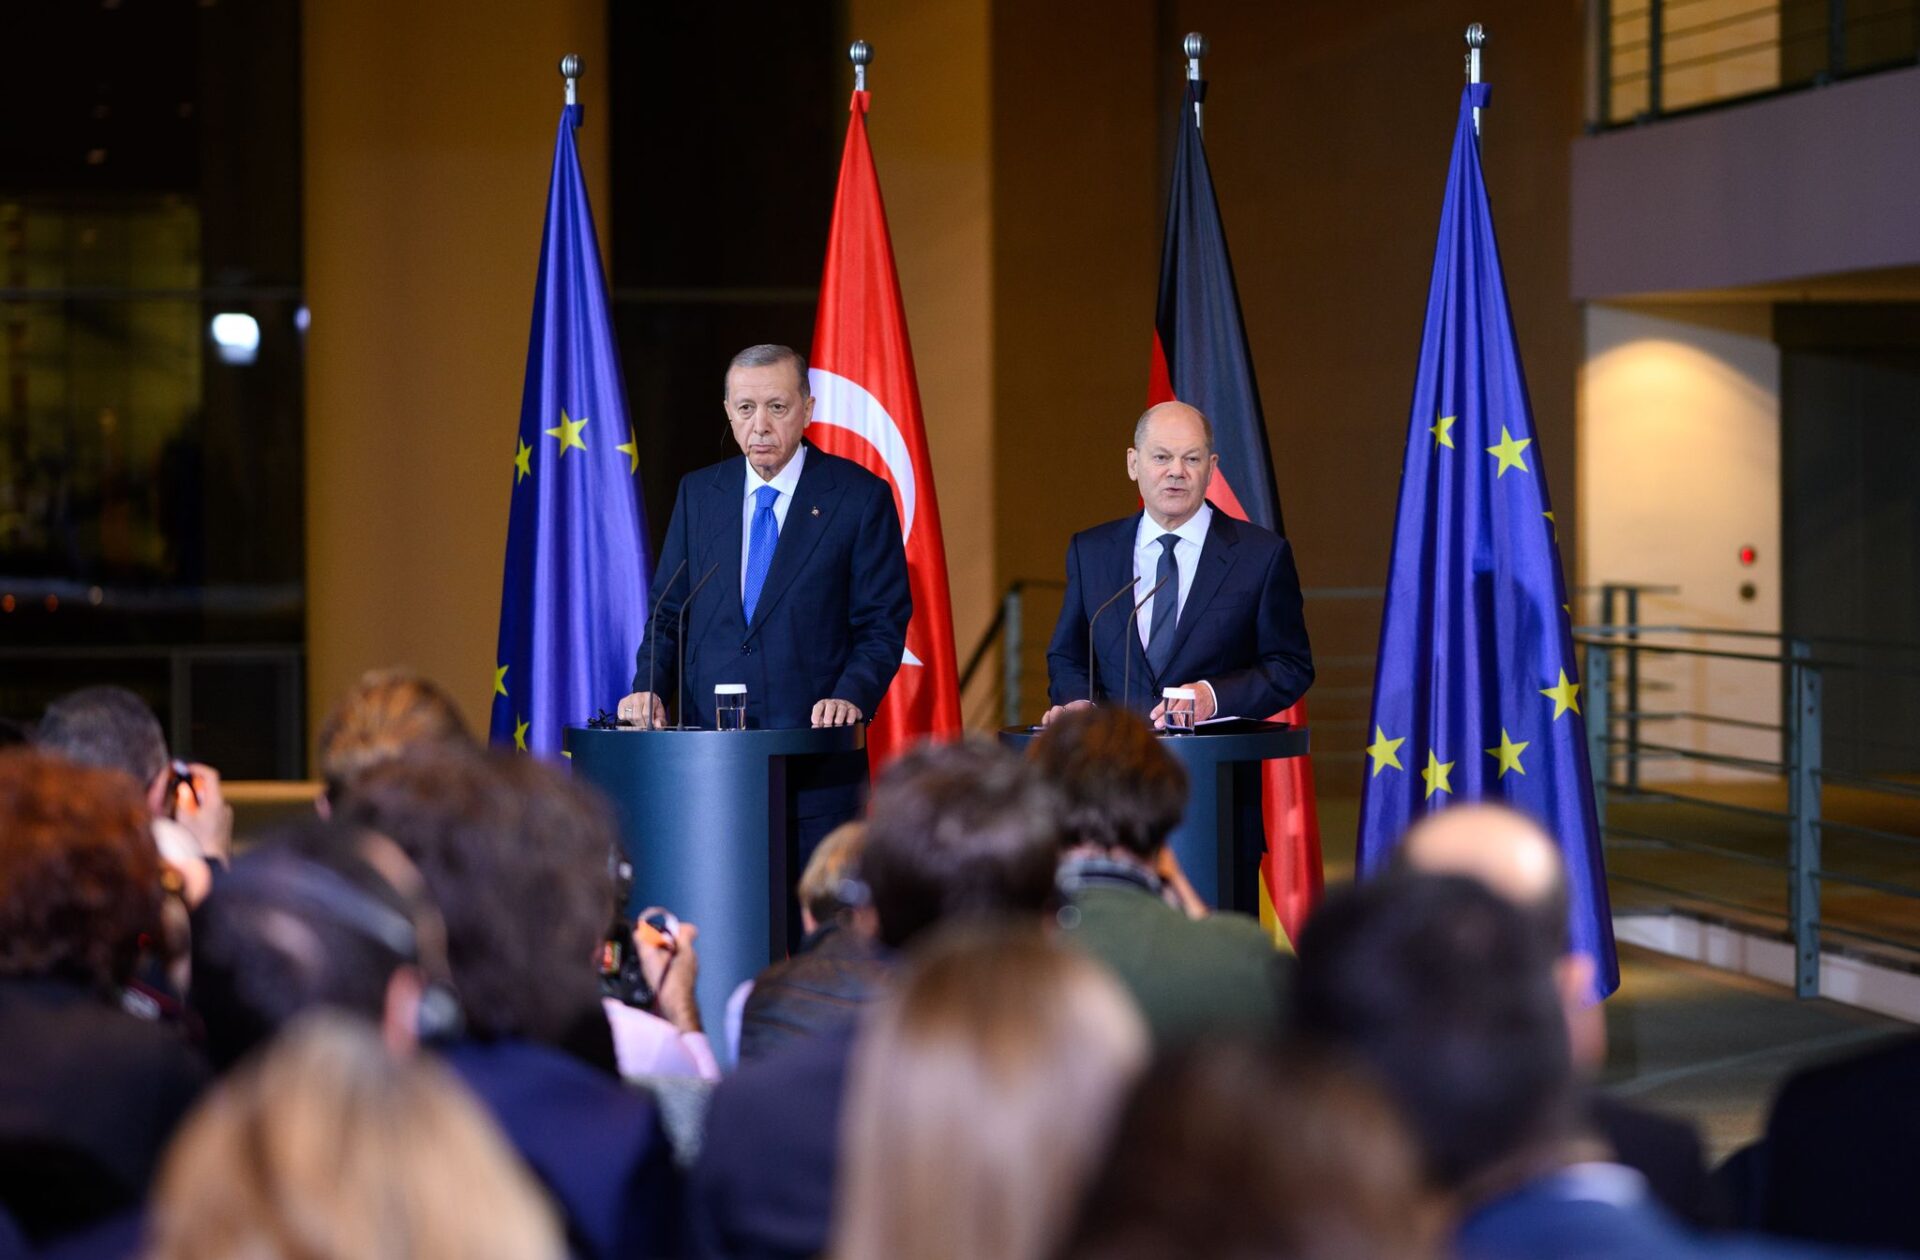 German Chancellor Olaf Scholz (R) and Turkish President Recep Tayyip Erdogan speak at a press conference ahead of their meeting and dinner at the Federal Chancellery.